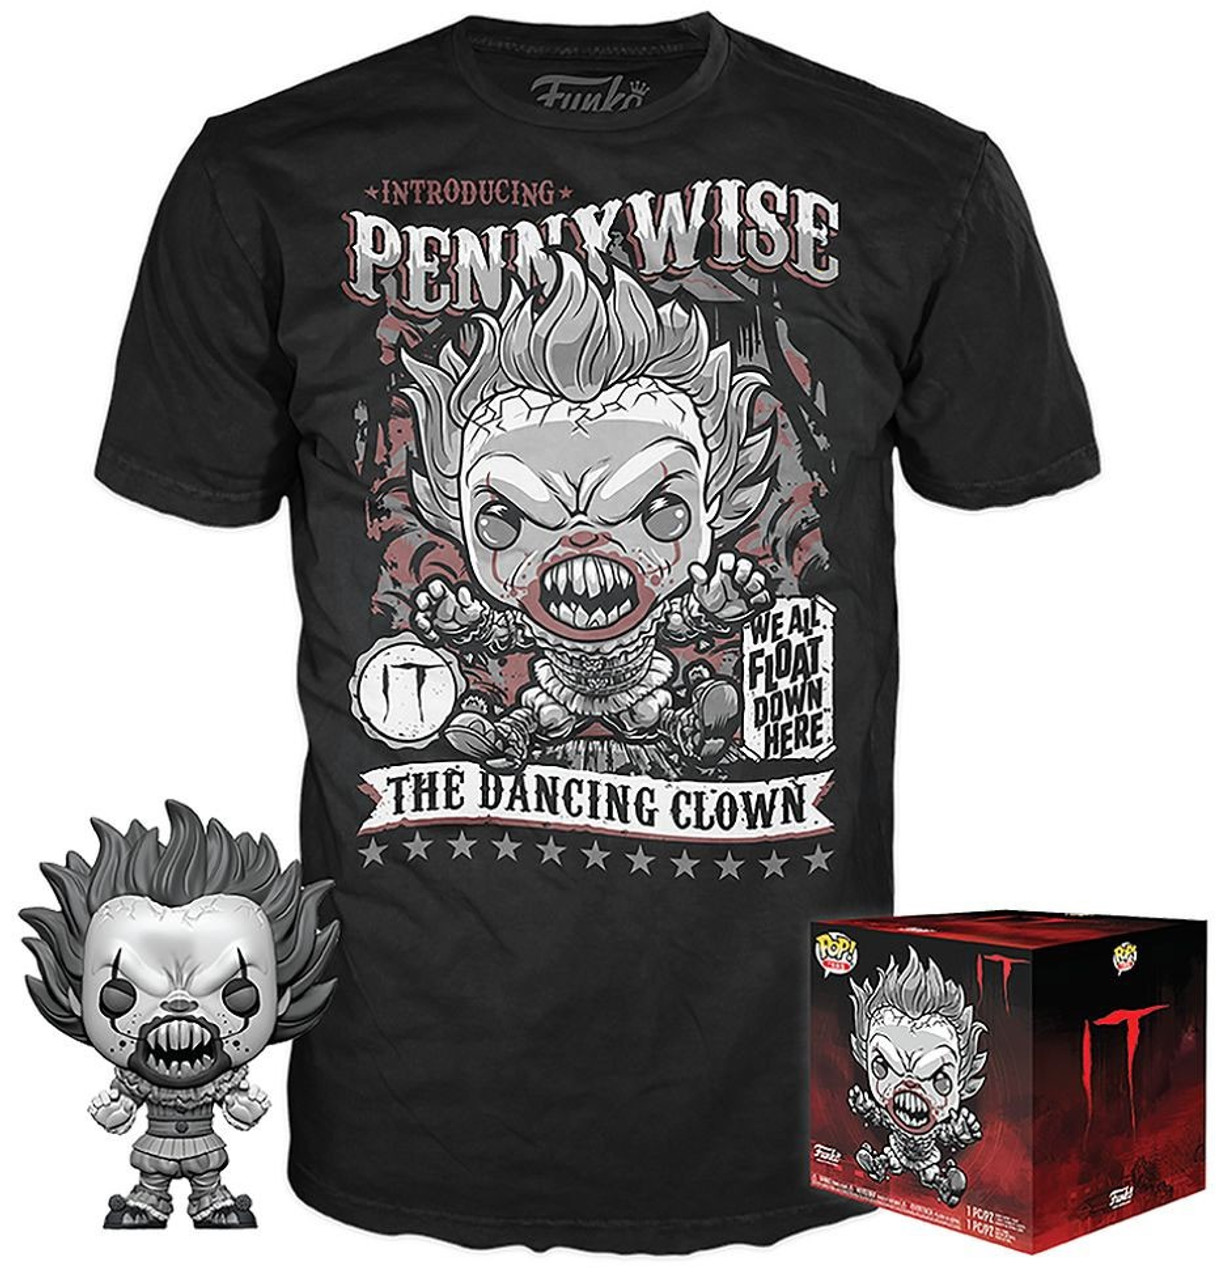 Funko It Movie 2017 Pop Movies Pennywise Exclusive Vinyl Figure T Shirt Medium Toywiz - pennywise shirt roblox